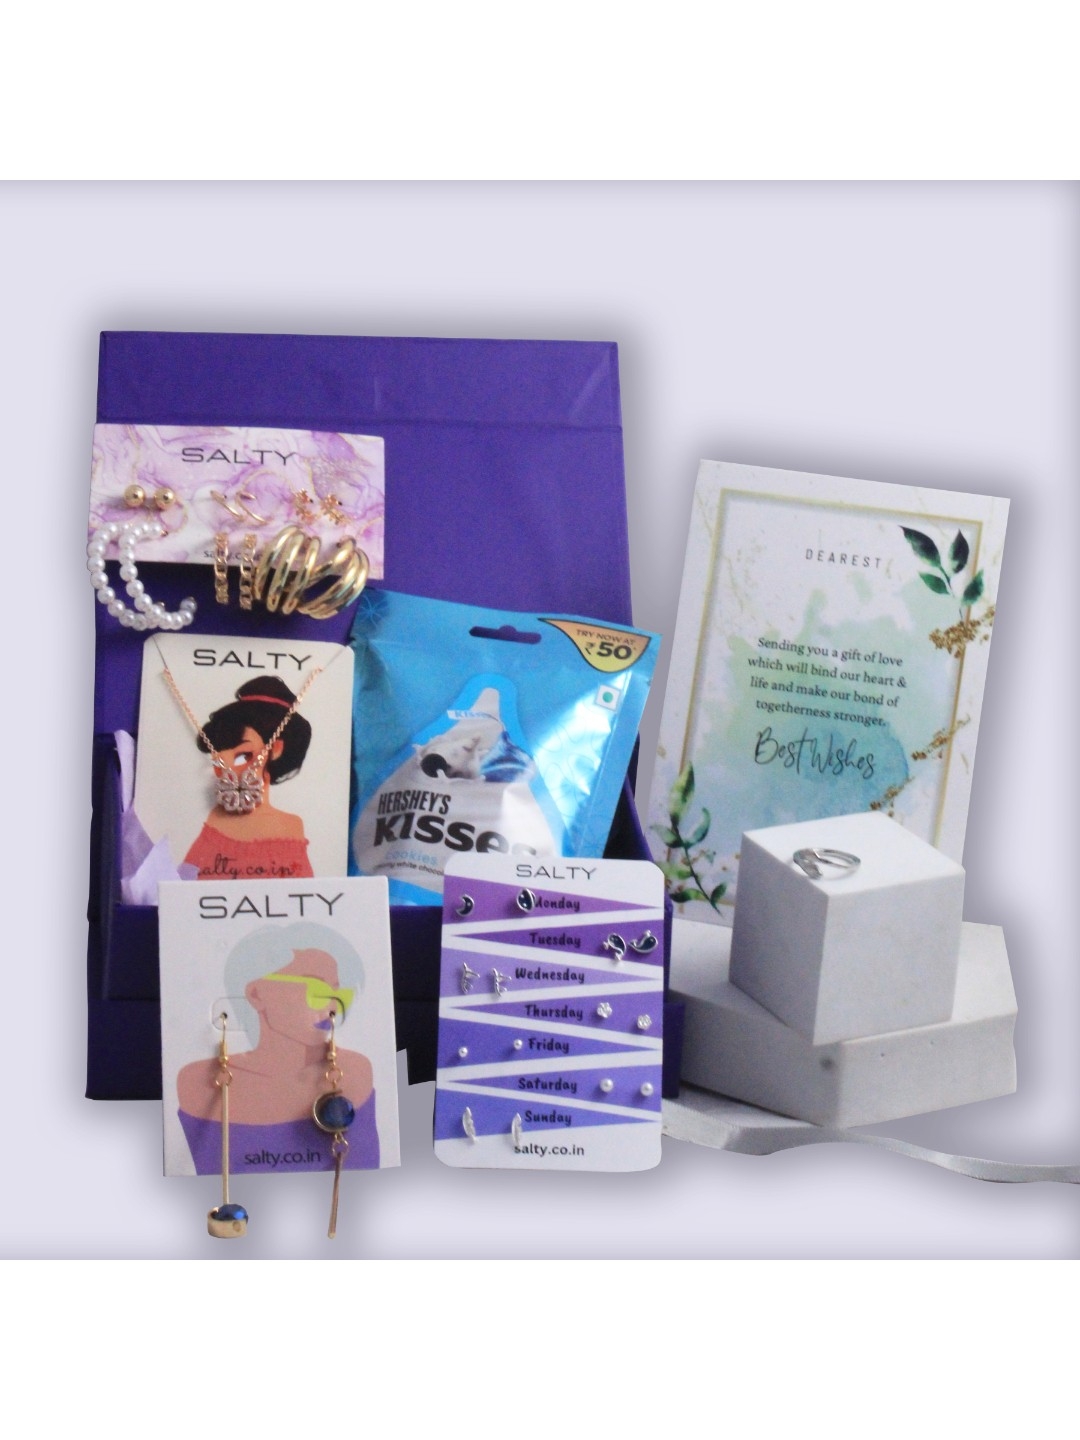 "The Bride Tribe" Jewellery Gift Box for Her with Personalised Card